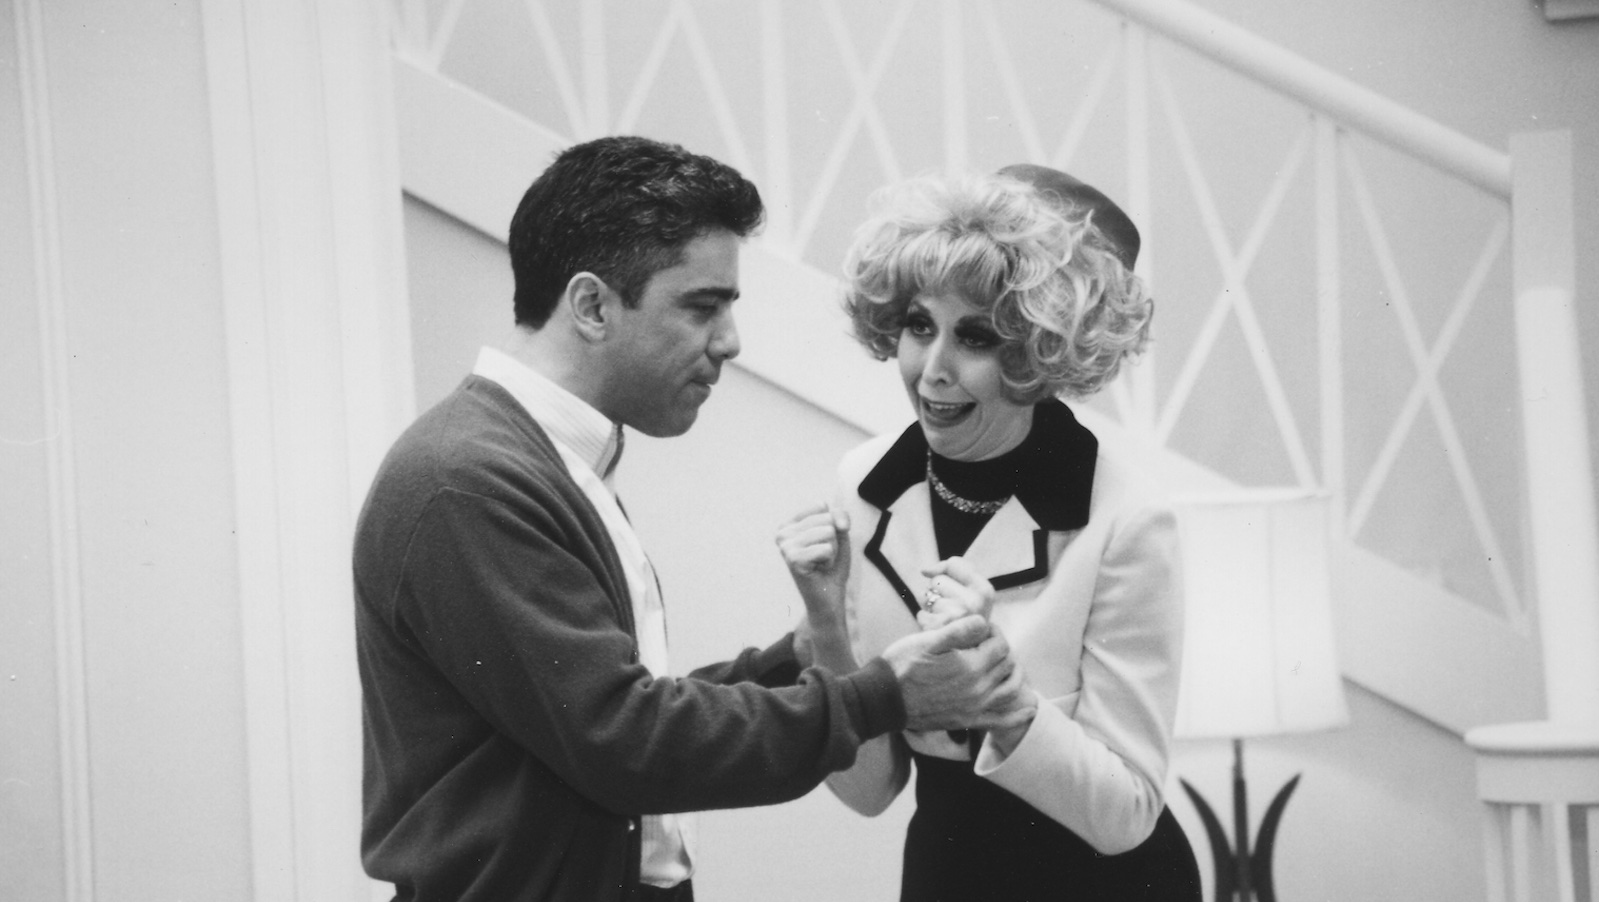 A black and white shot of a man and woman on a sitcom set fighting